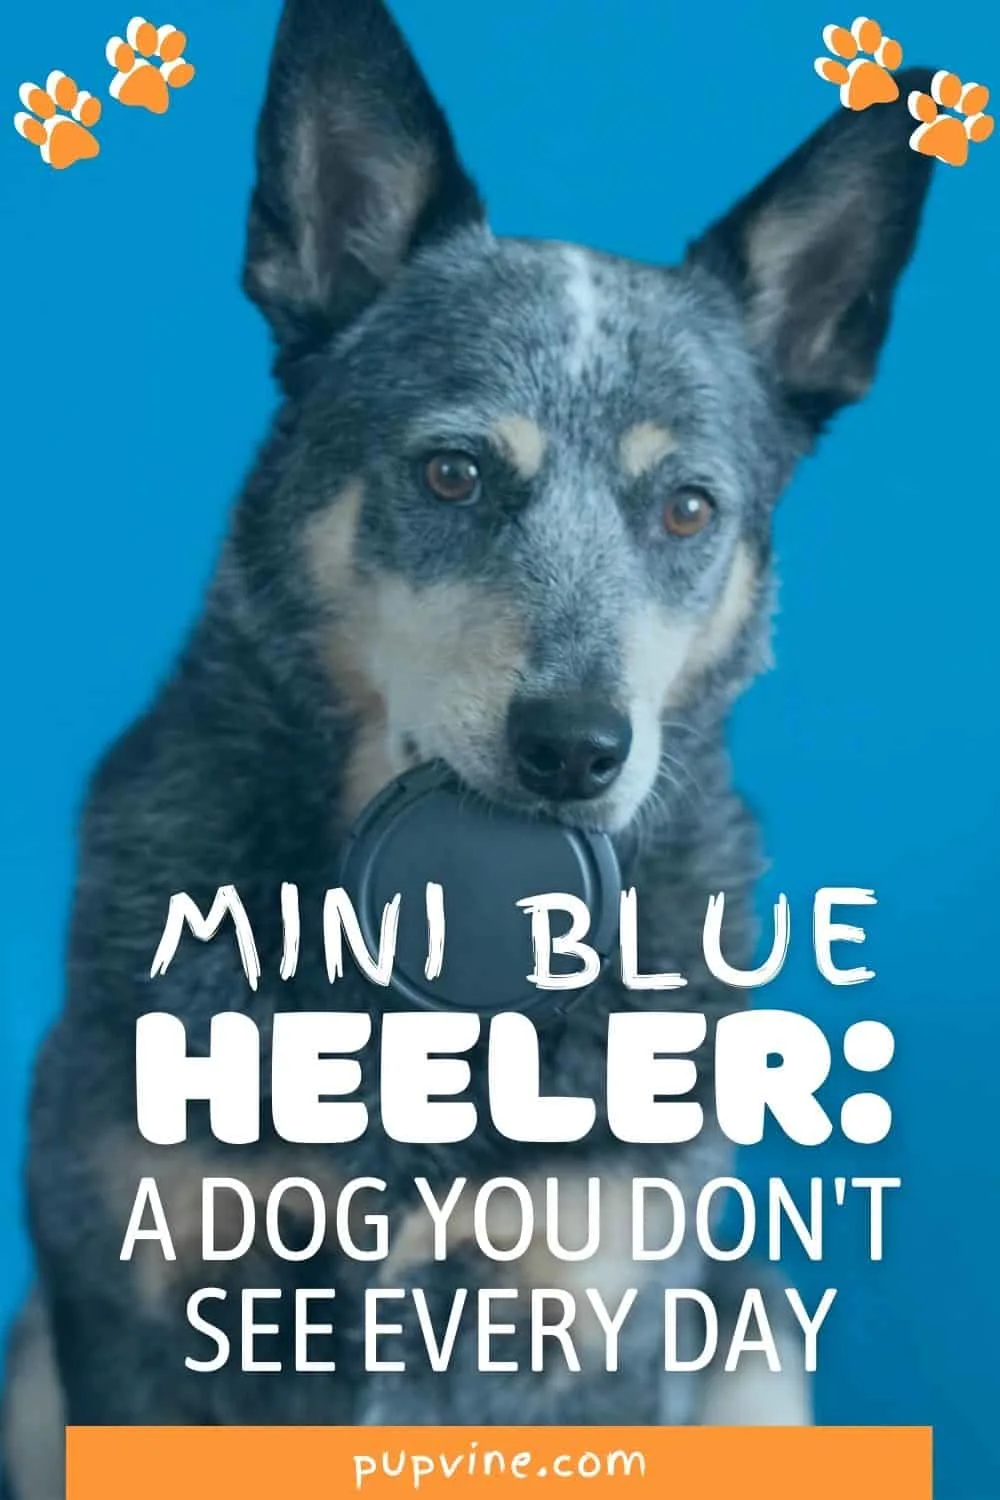 Mini Blue Heeler: A Dog You Don't See Every Day